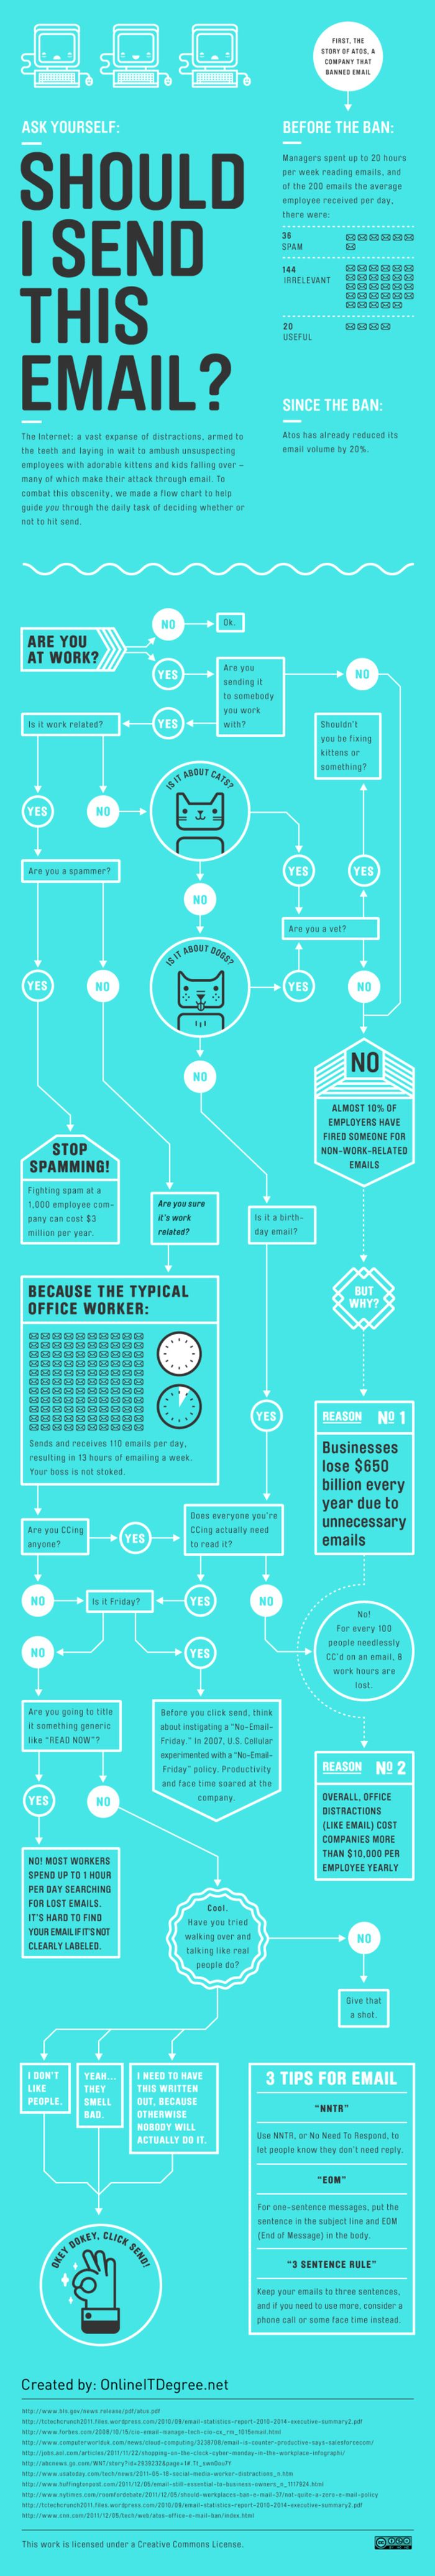 Flowchart: Should I Send This Email? (infographic)